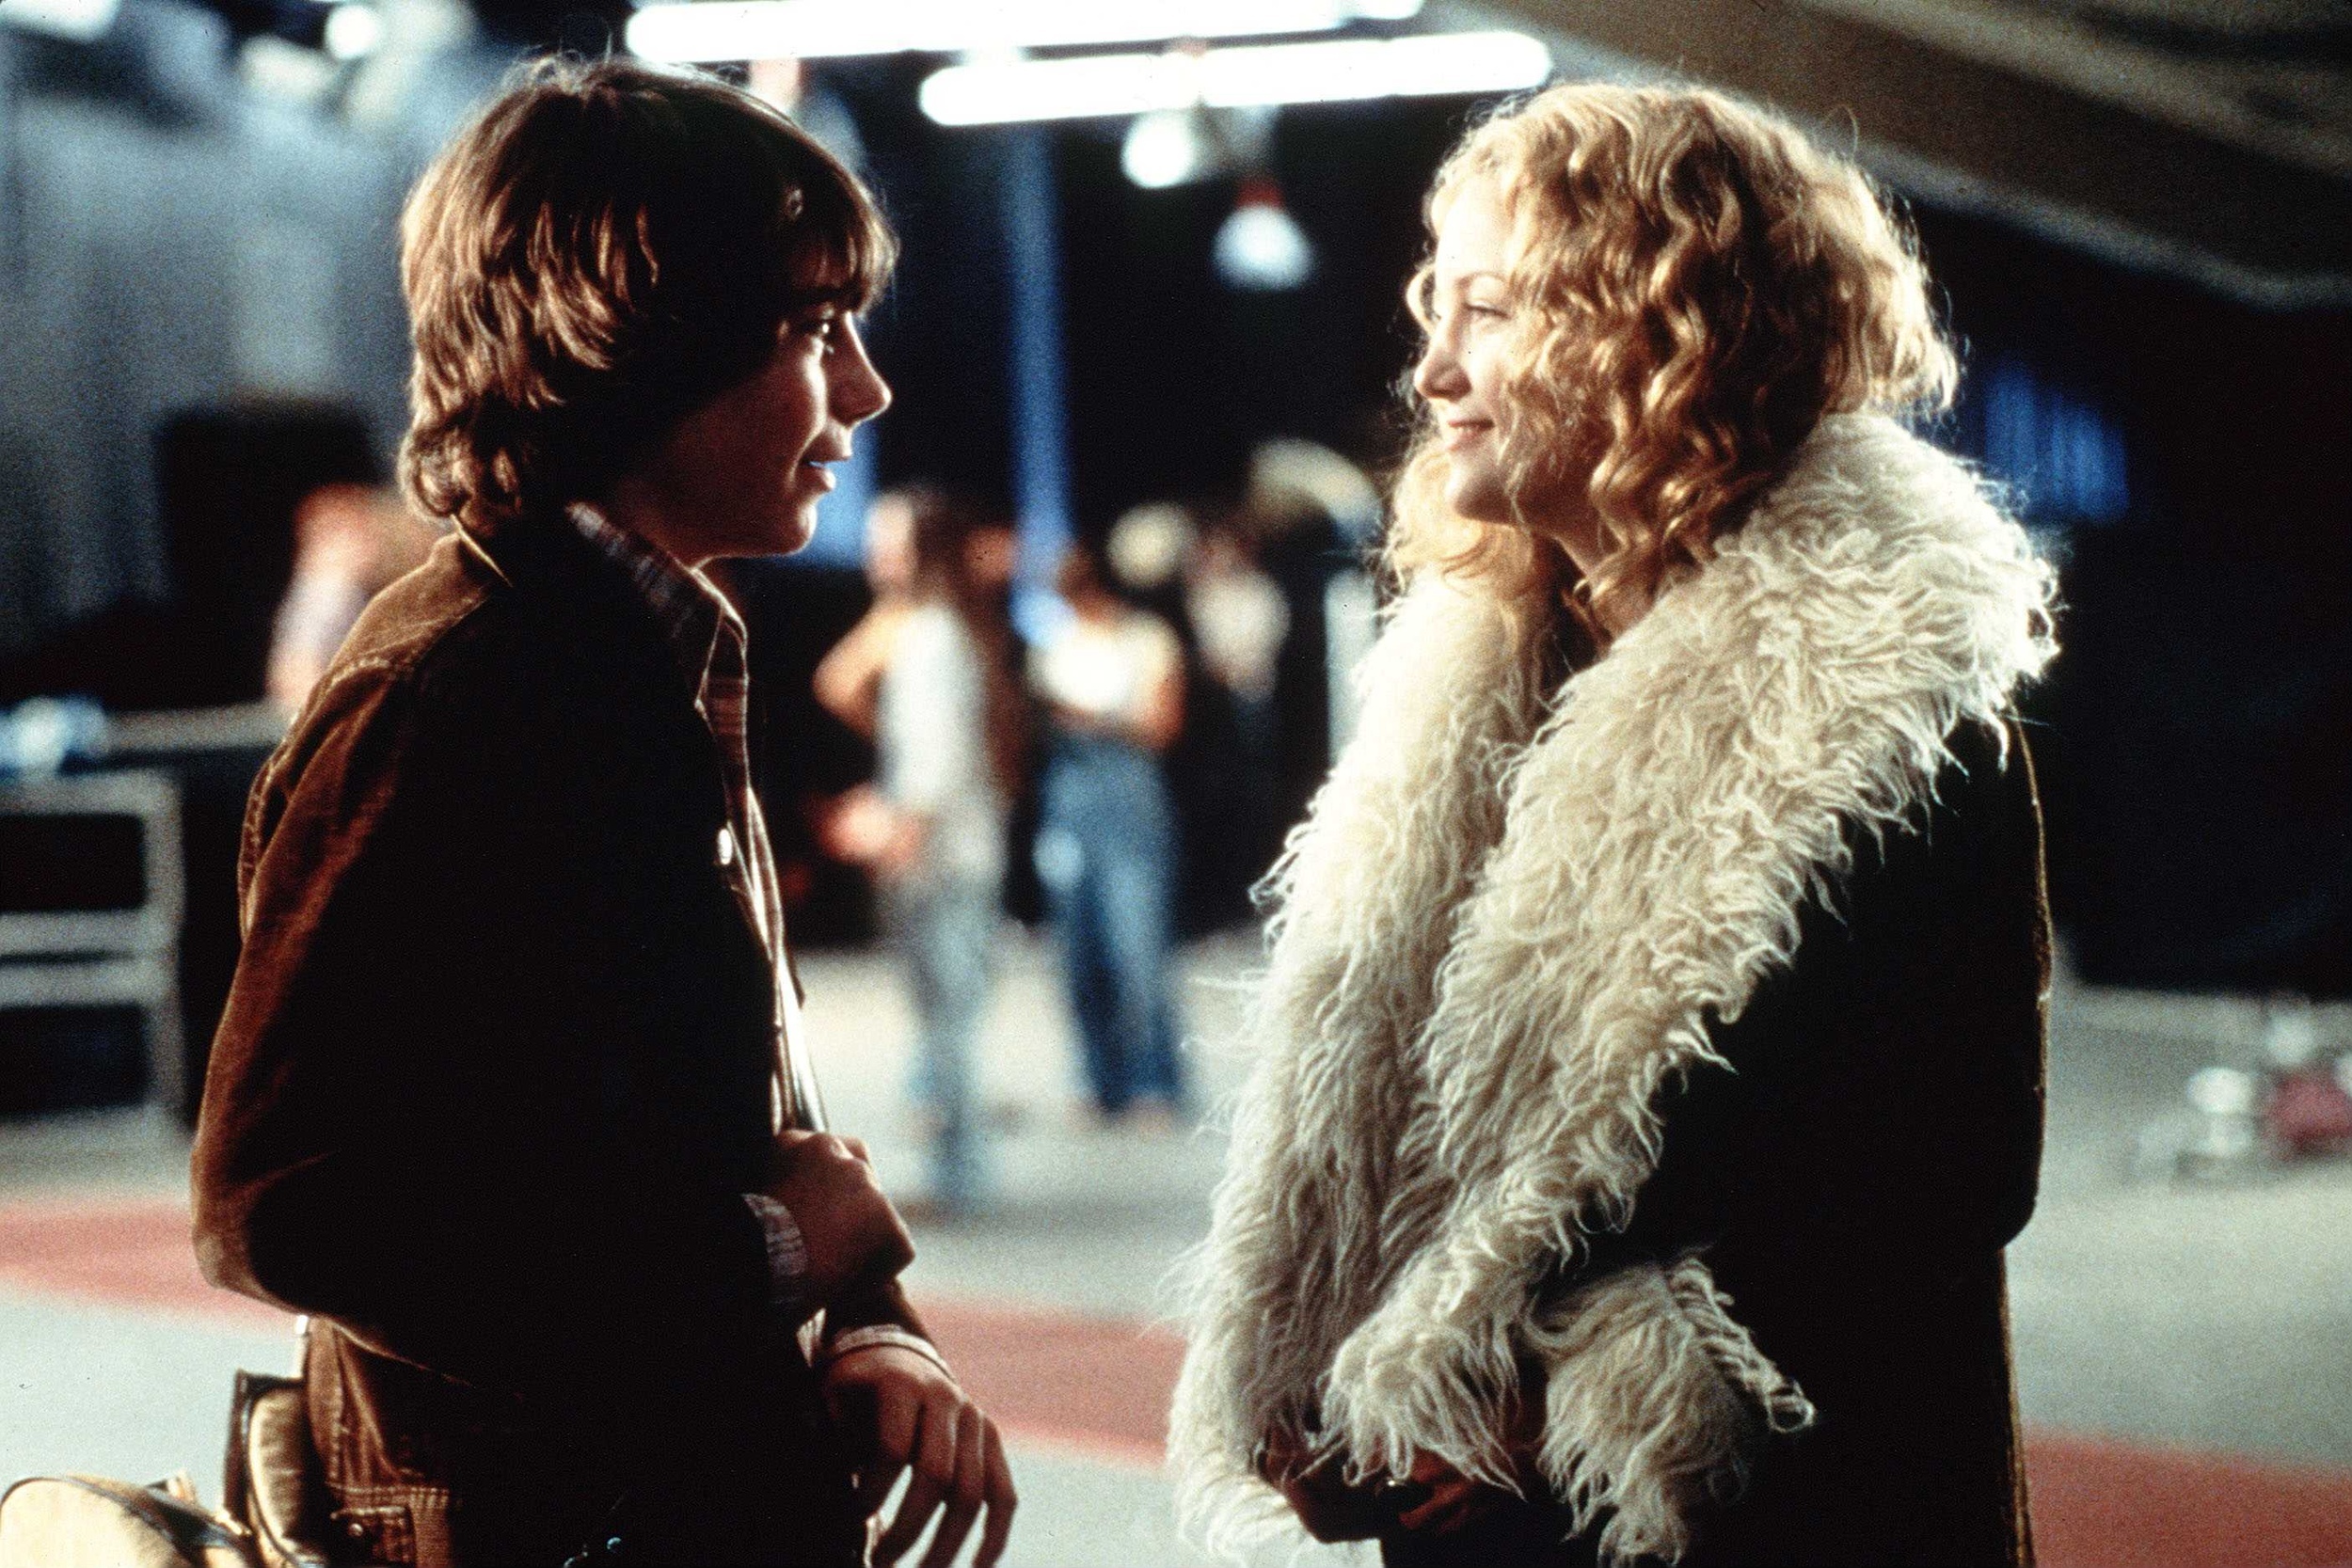 <p>Does <em>Almost Famous</em> automatically become cooler when you learn it was inspired by real life? The answer is yes. The film was written, directed, and produced by Cameron Crowe, who wrote for <em>Rolling Stone</em> as a teenager. Most of us probably wouldn’t have nearly as cool a story to tell from when we were 16. </p><p>You may also like: <a href='https://www.yardbarker.com/entertainment/articles/20_period_pieces_you_should_watch/s1__40240173'>20 period pieces you should watch</a></p>